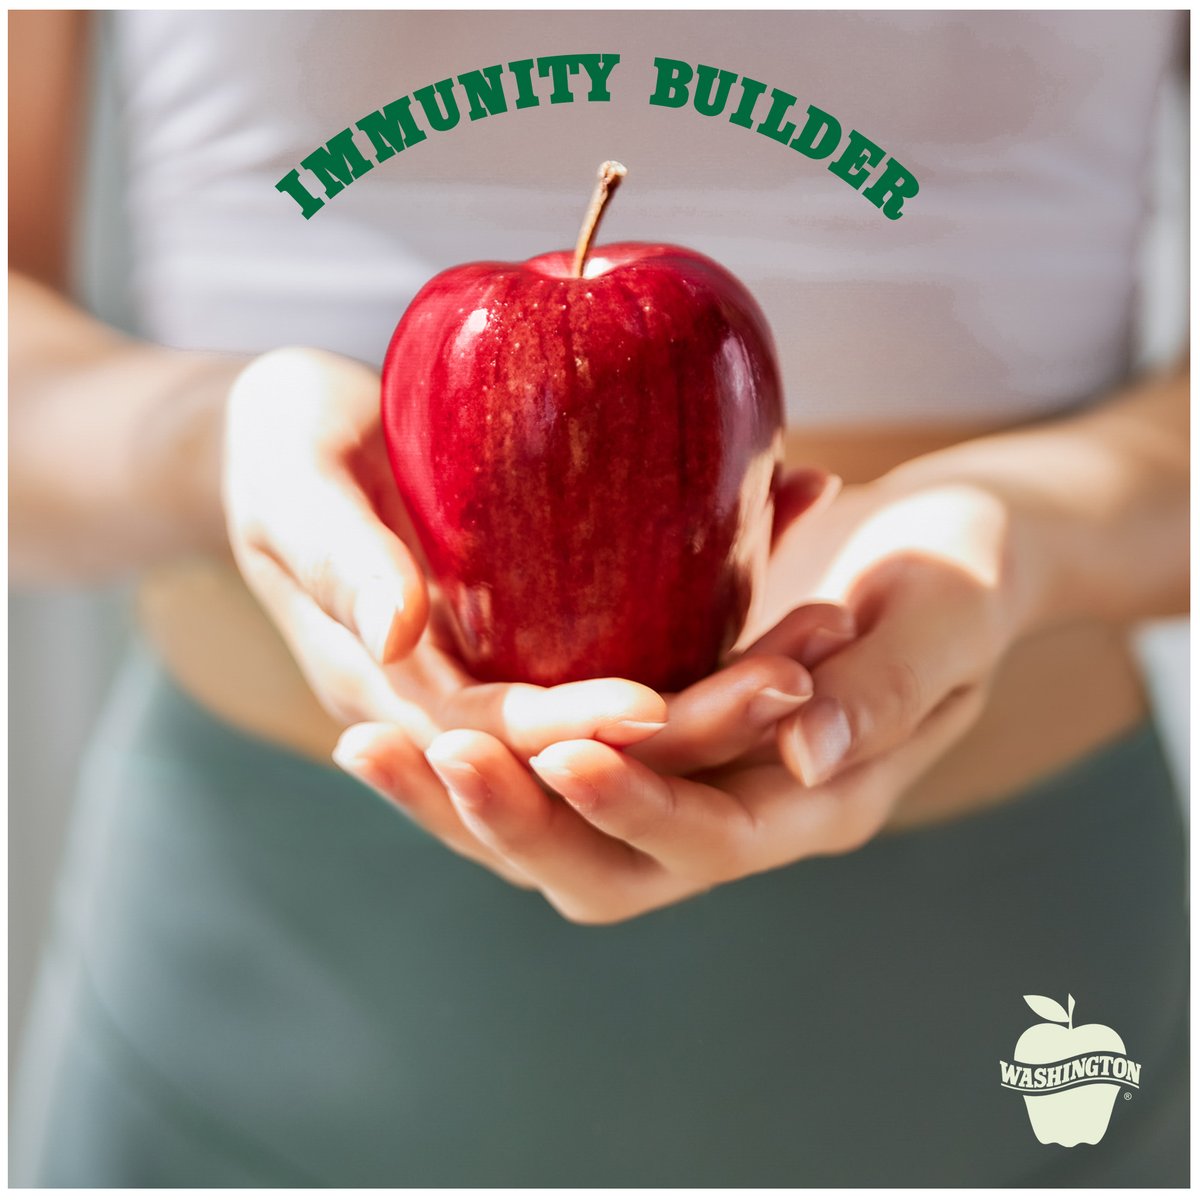 Washington Apples are an important piece in your immune building toolkit. Make sure you are having them daily!

#WashingtonApples #WashingtonApplesIndia #apples #TheCrunchIndiaLoves #KuchhKhaasHai